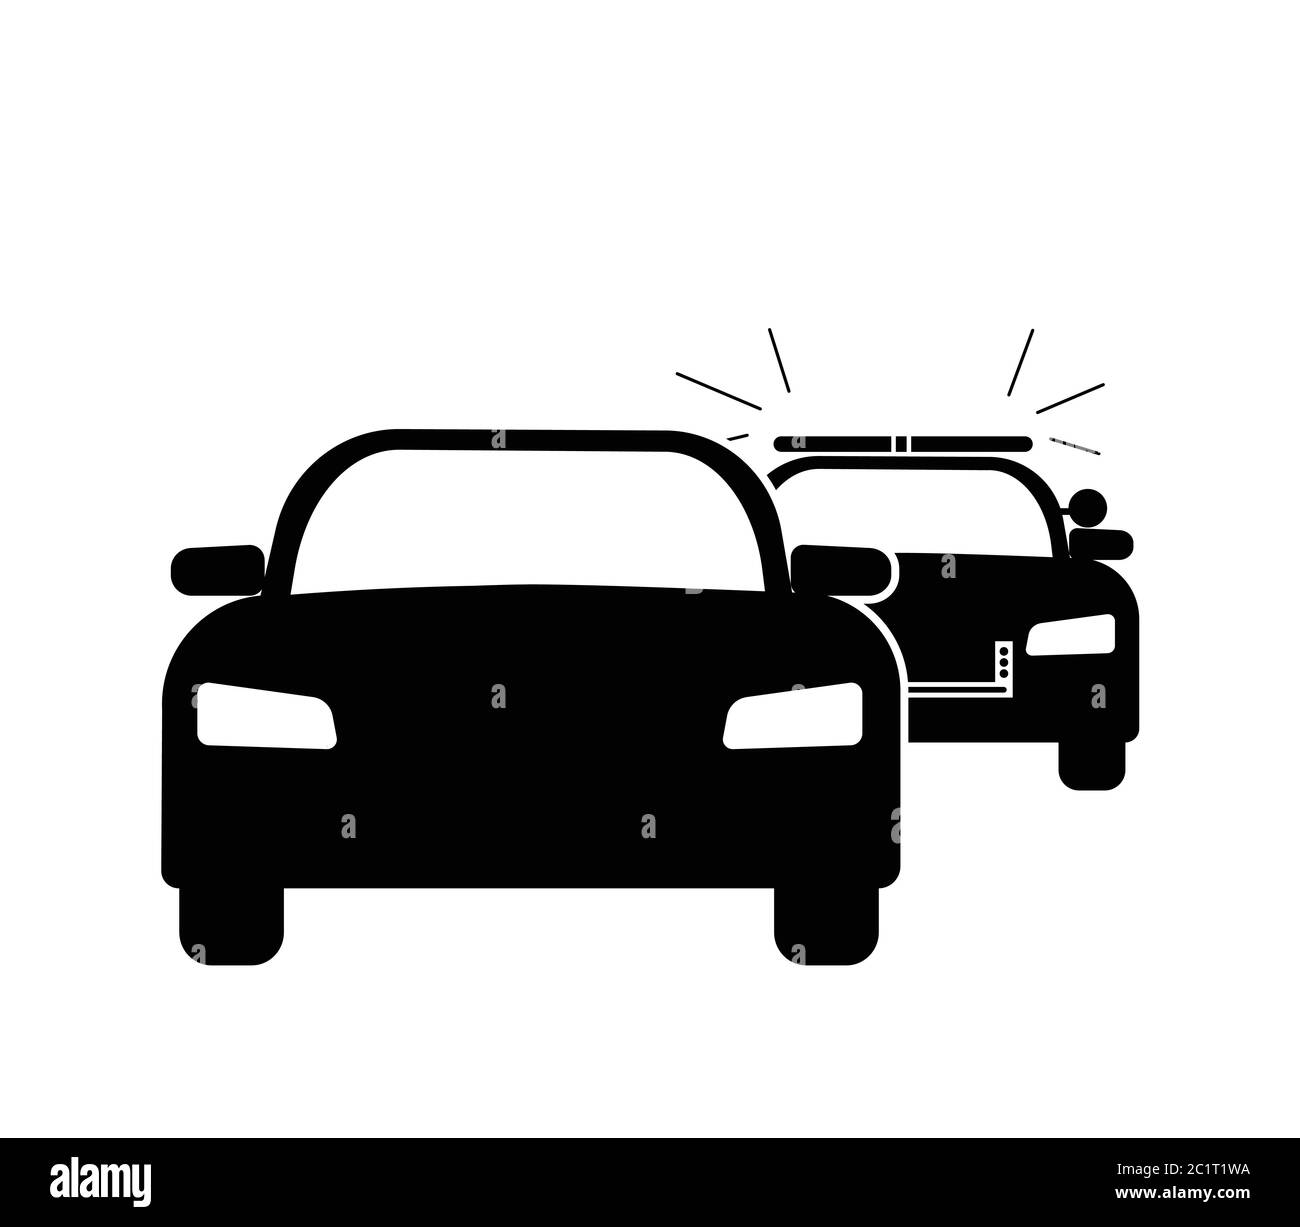 Car Getting Pulled Over Stopped by Police Cop Flashing Siren Lights. Black Illustration Isolated on a White Background. EPS Vector Stock Vector